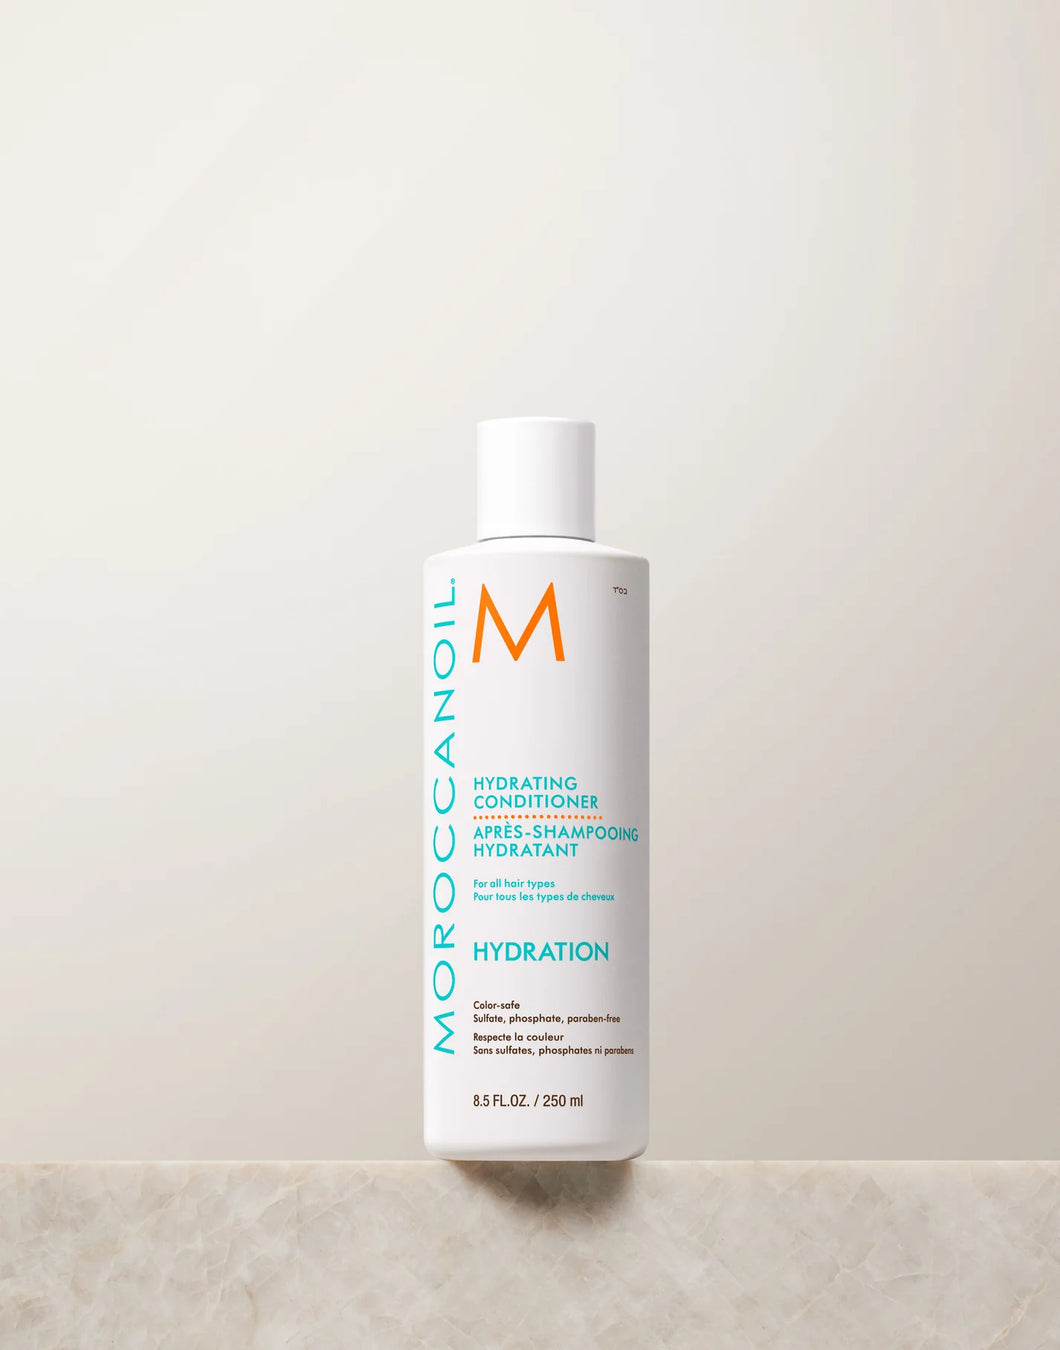 Hydrating Conditioner - For all hair types